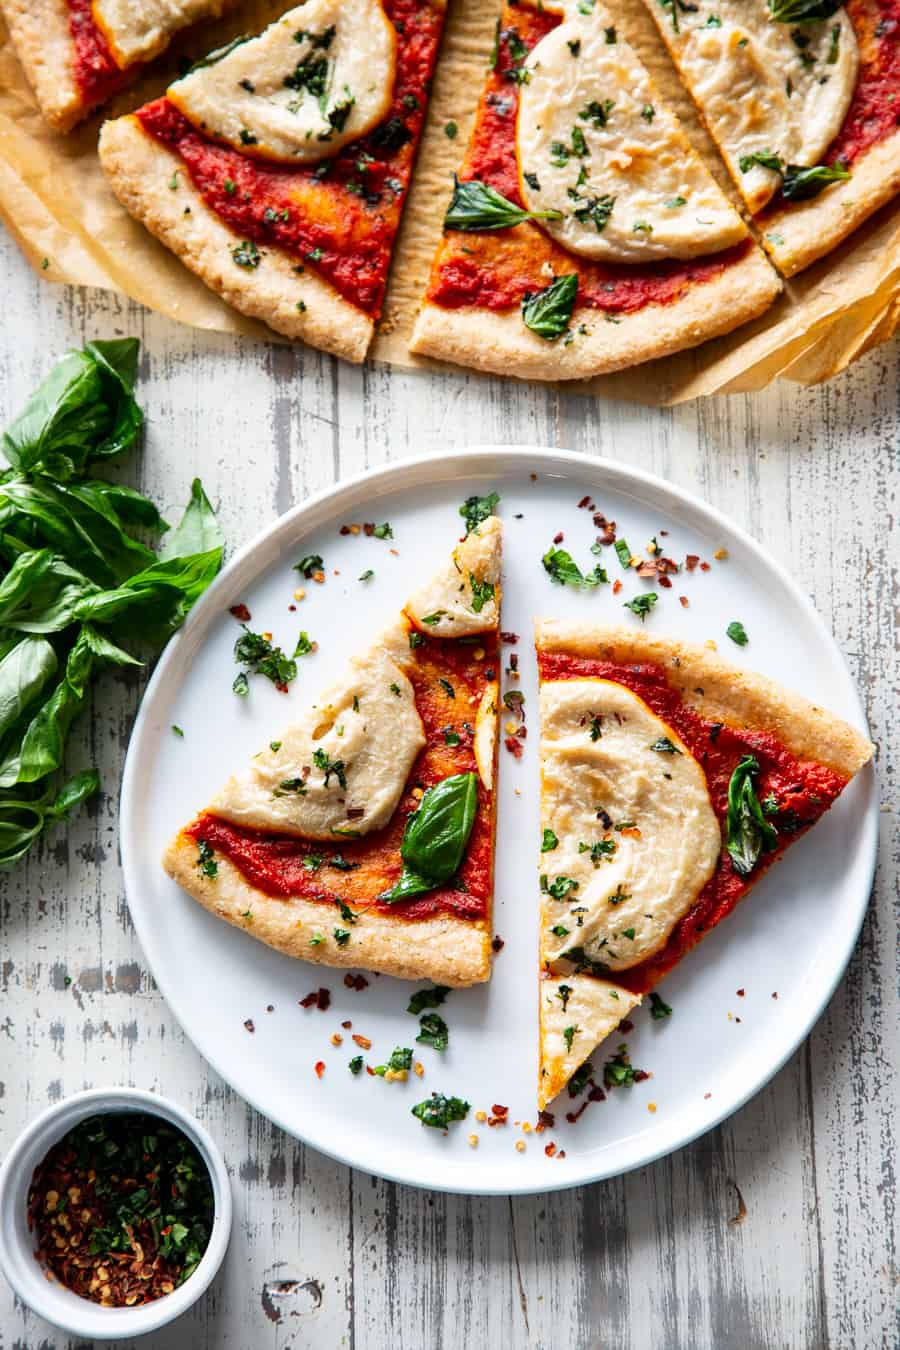 10 Minute Dairy-Free Pizza (No Cheese Needed!) - Go Dairy Free